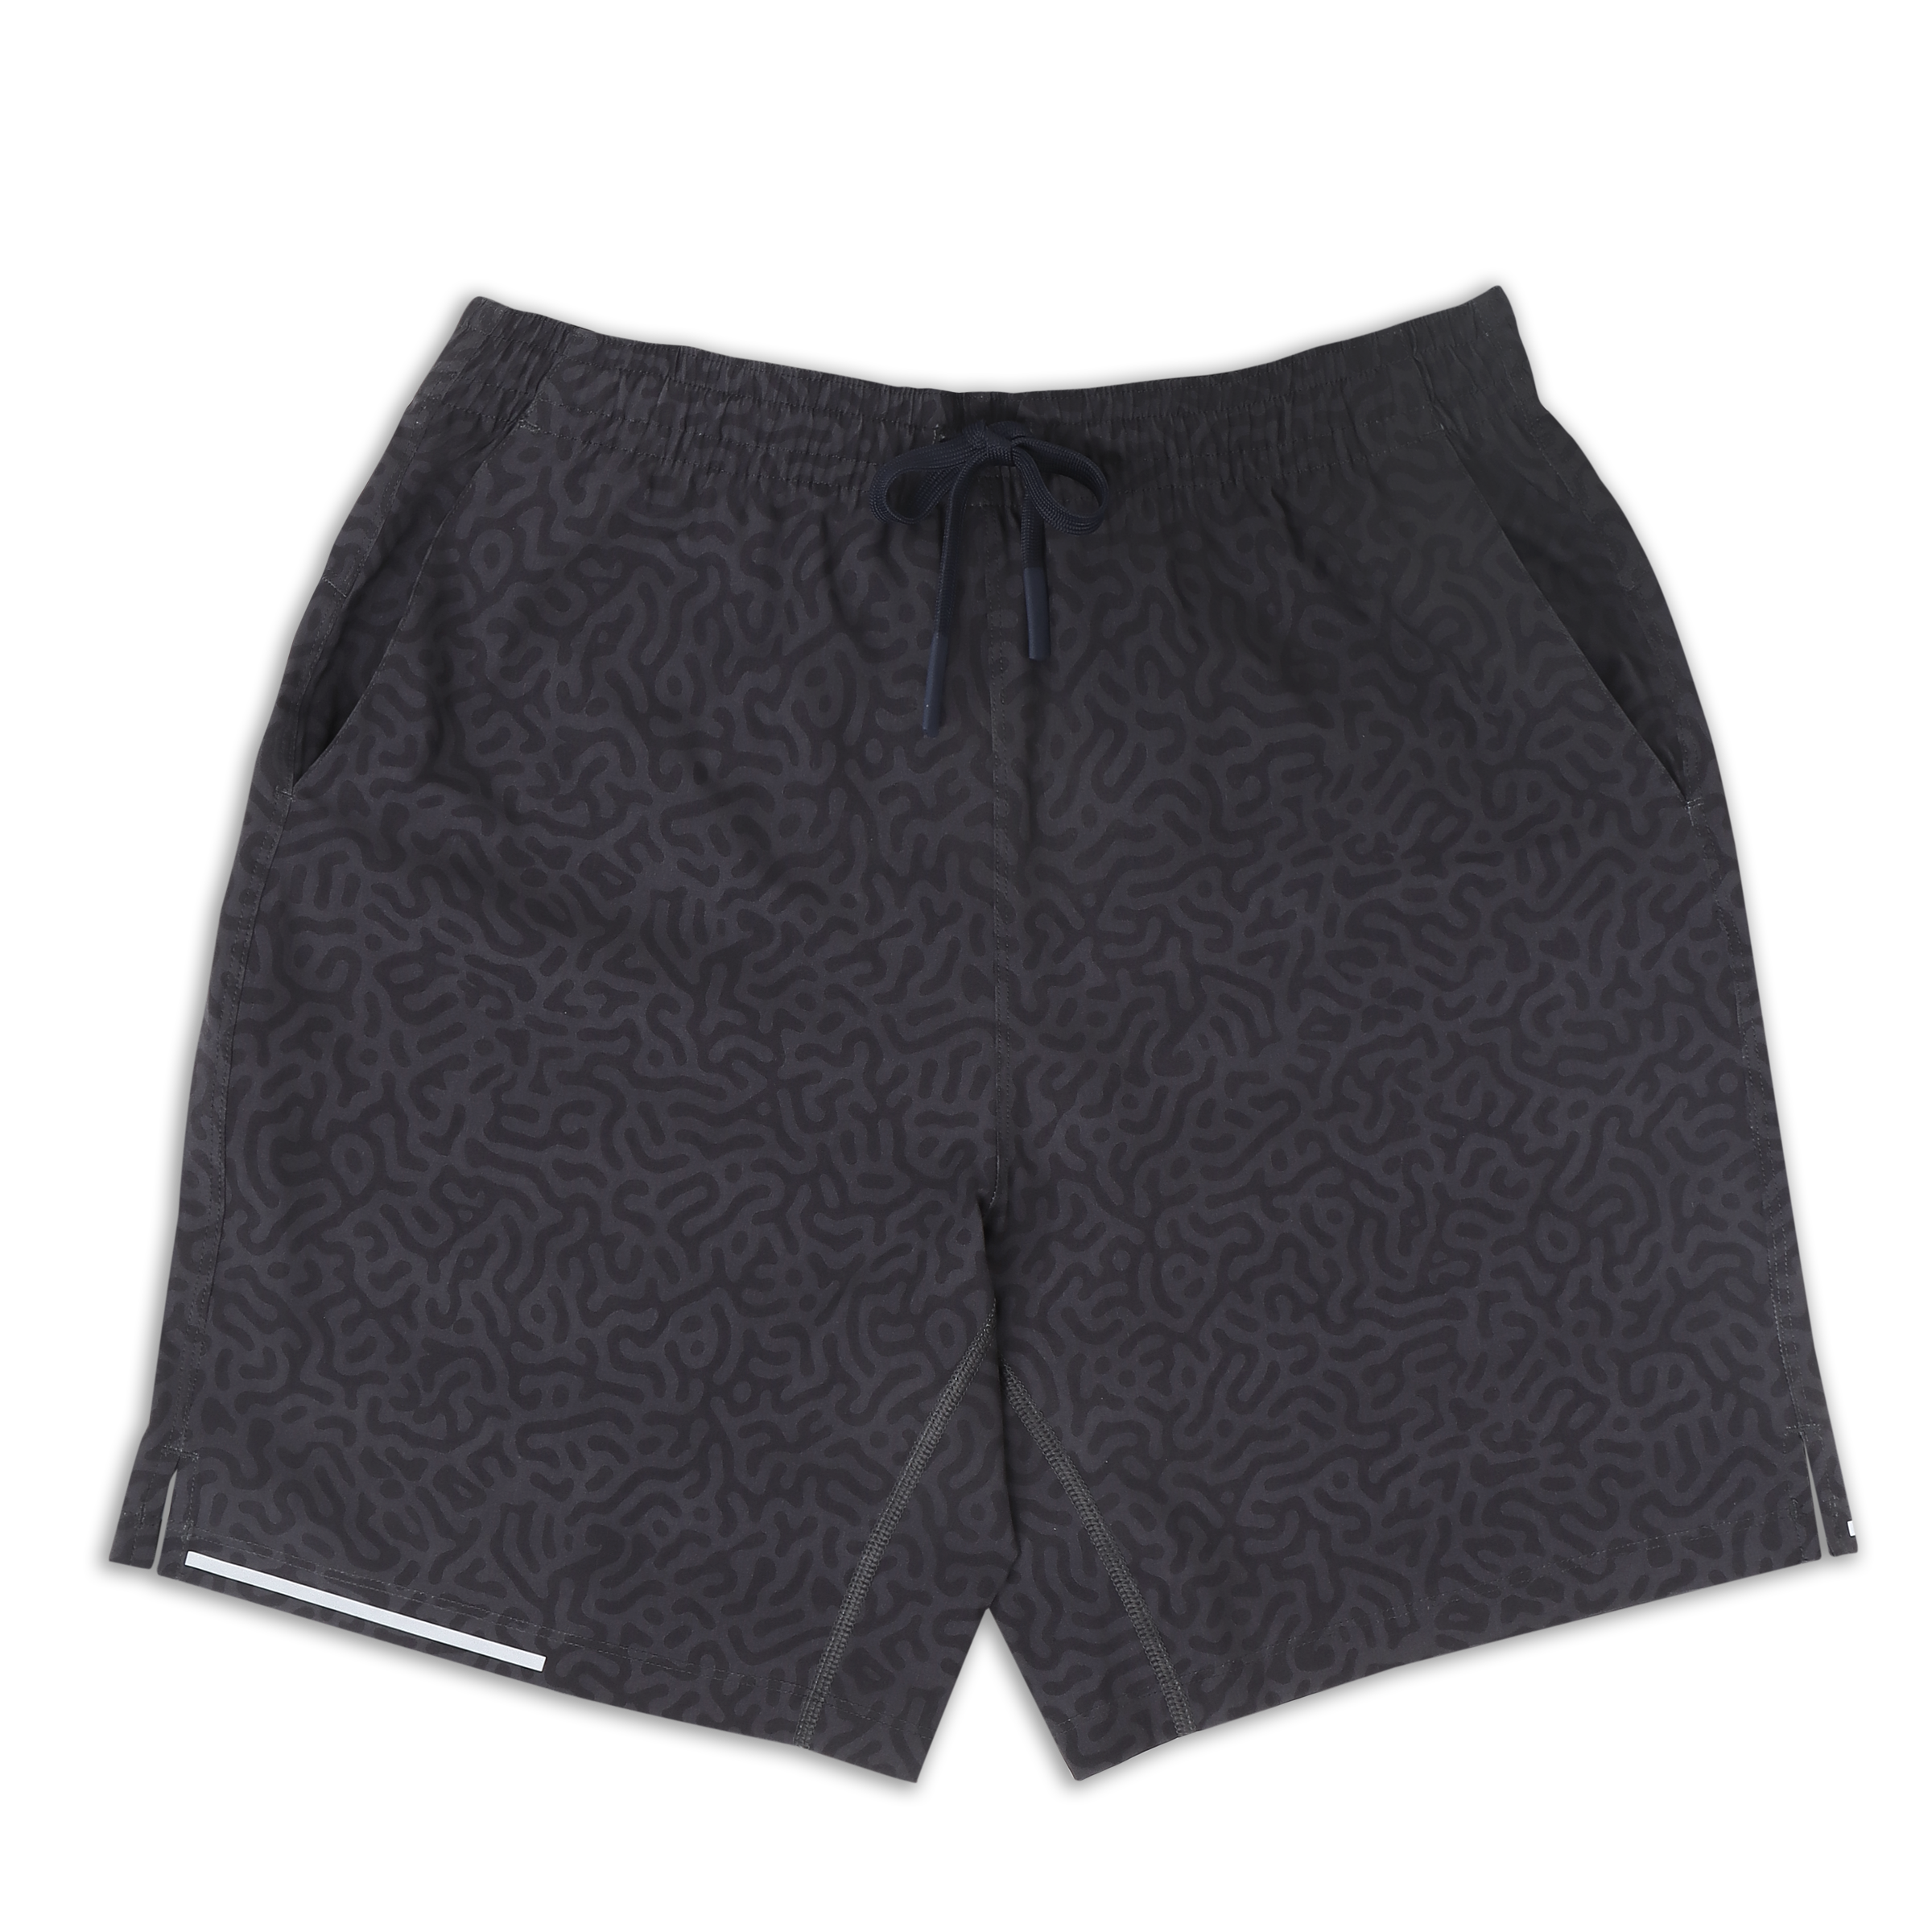 Run Short v2 7" Maze Navy front with elastic waistband, dyed-to-match drawstring with rubberized tips, two front pockets, split hem, and reflective line on bottom right hem